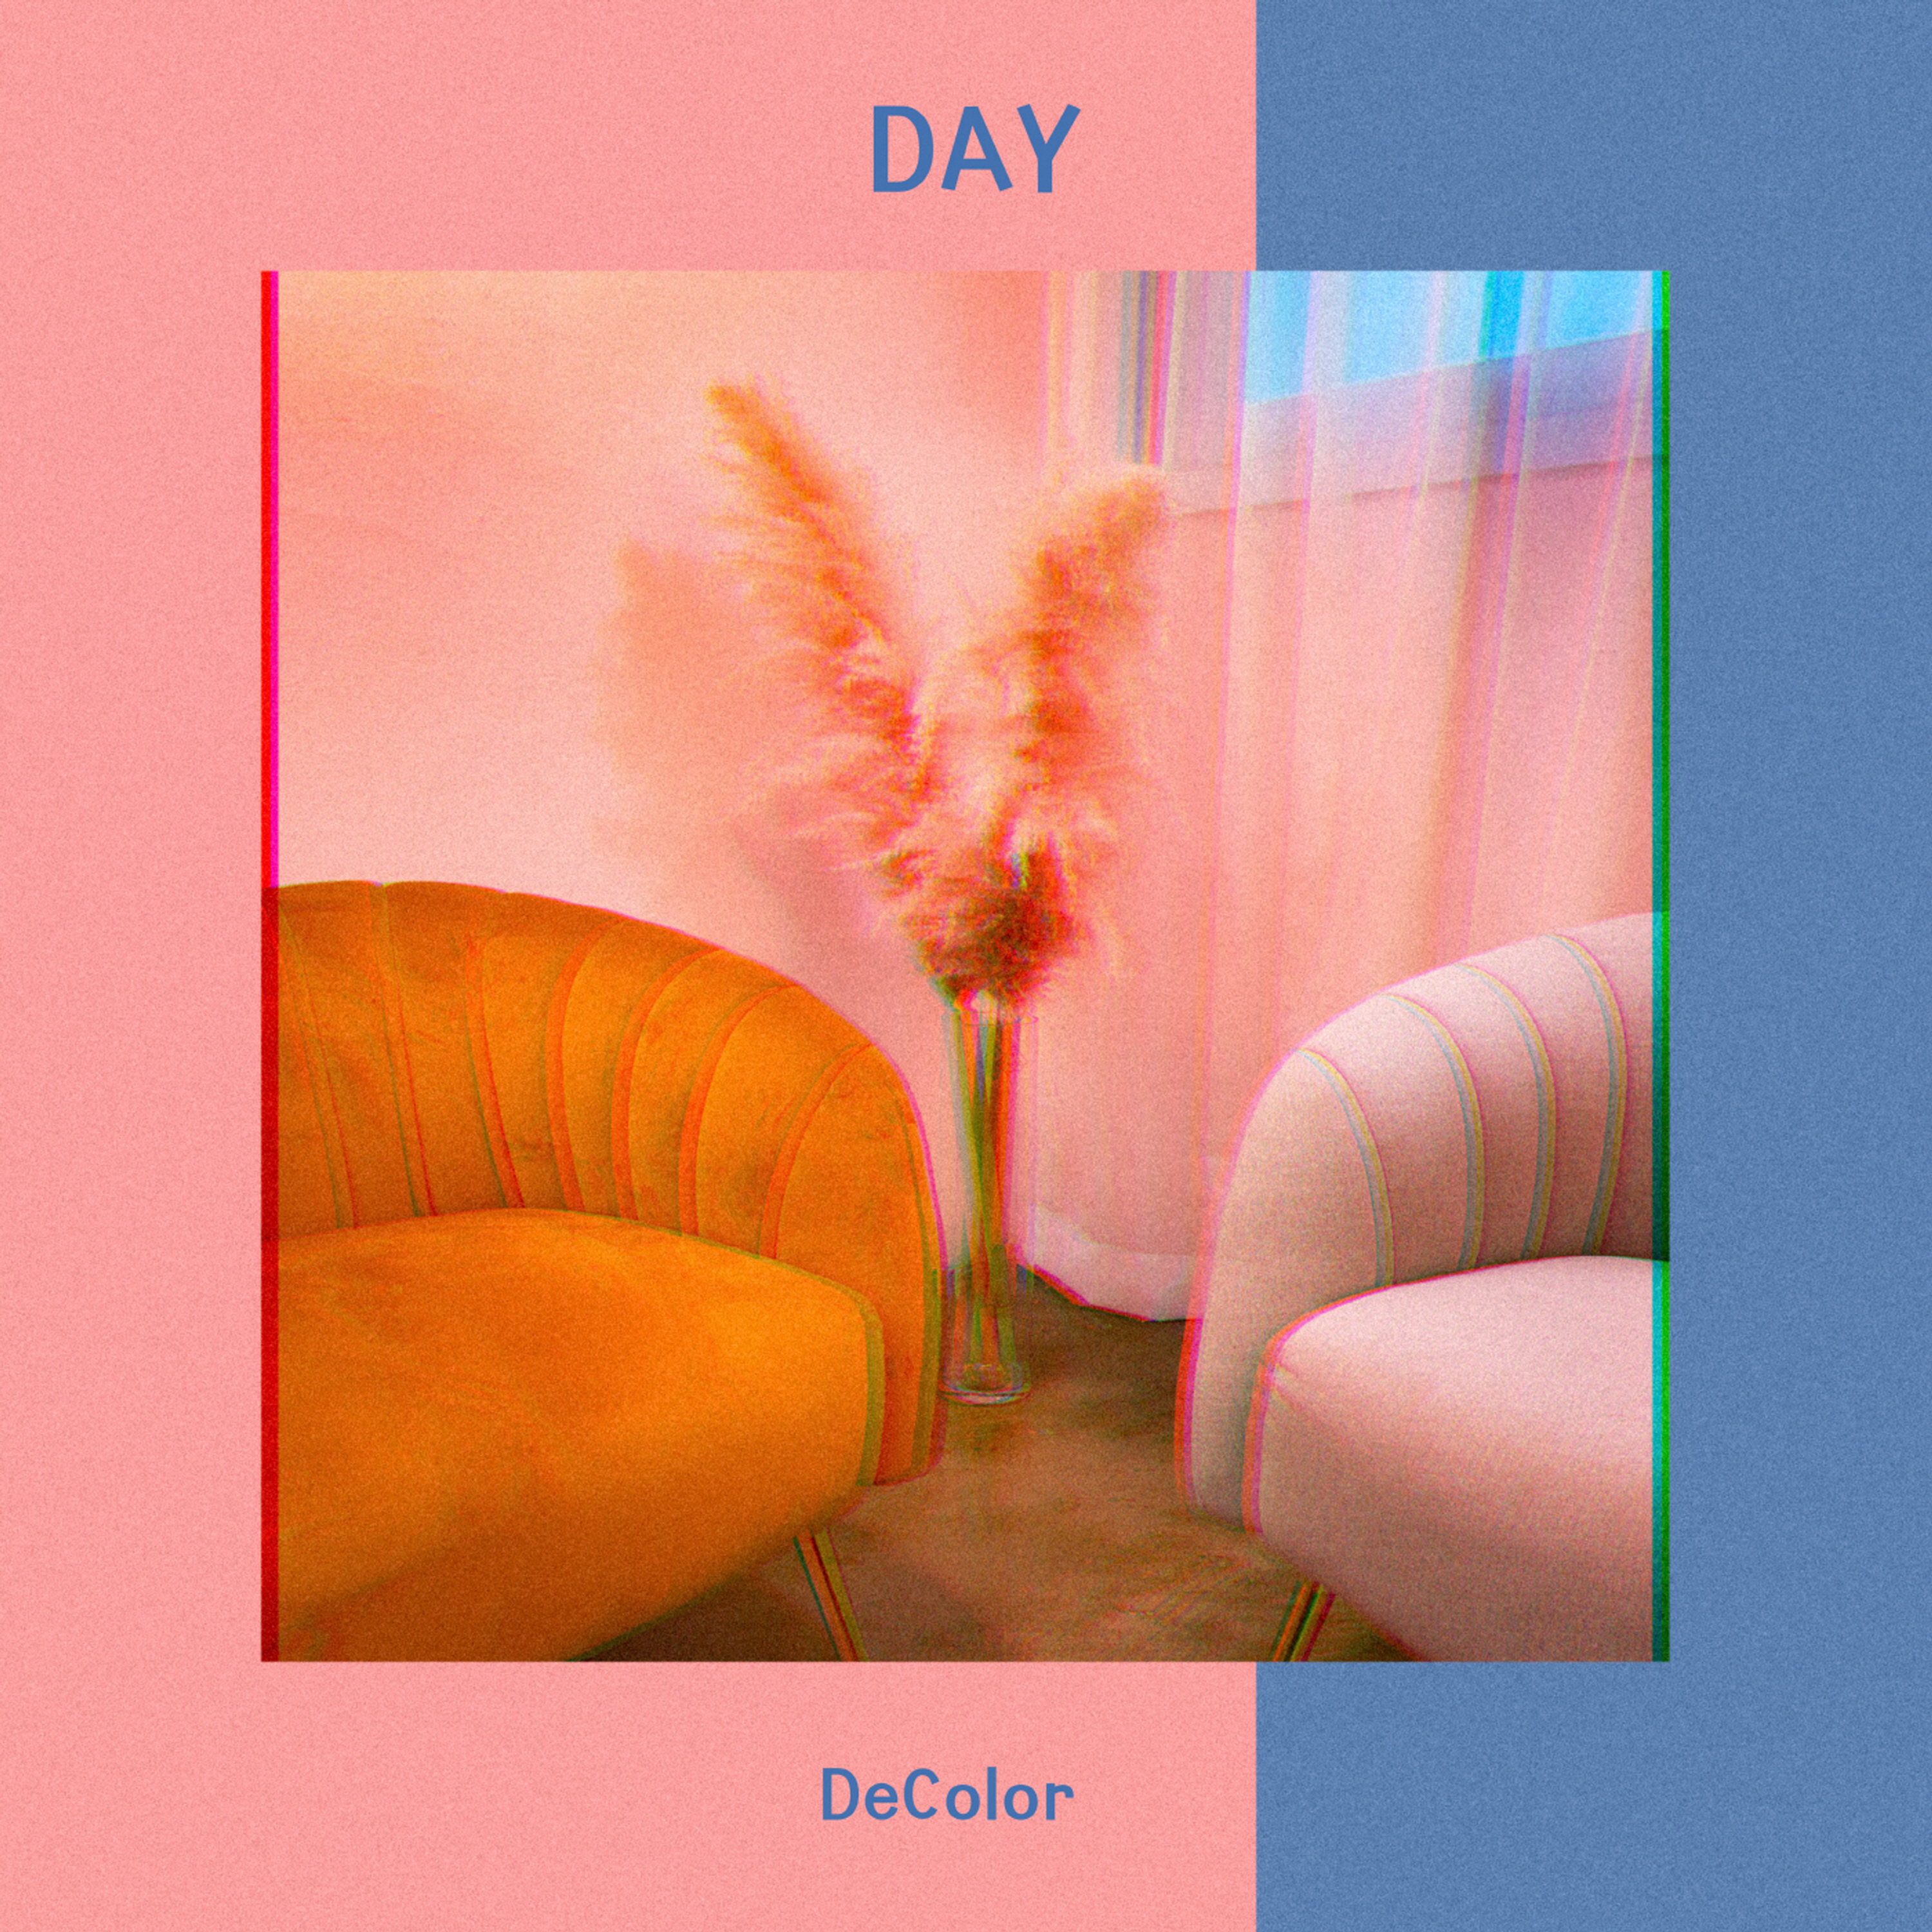 DAY-DeColor (디컬러)